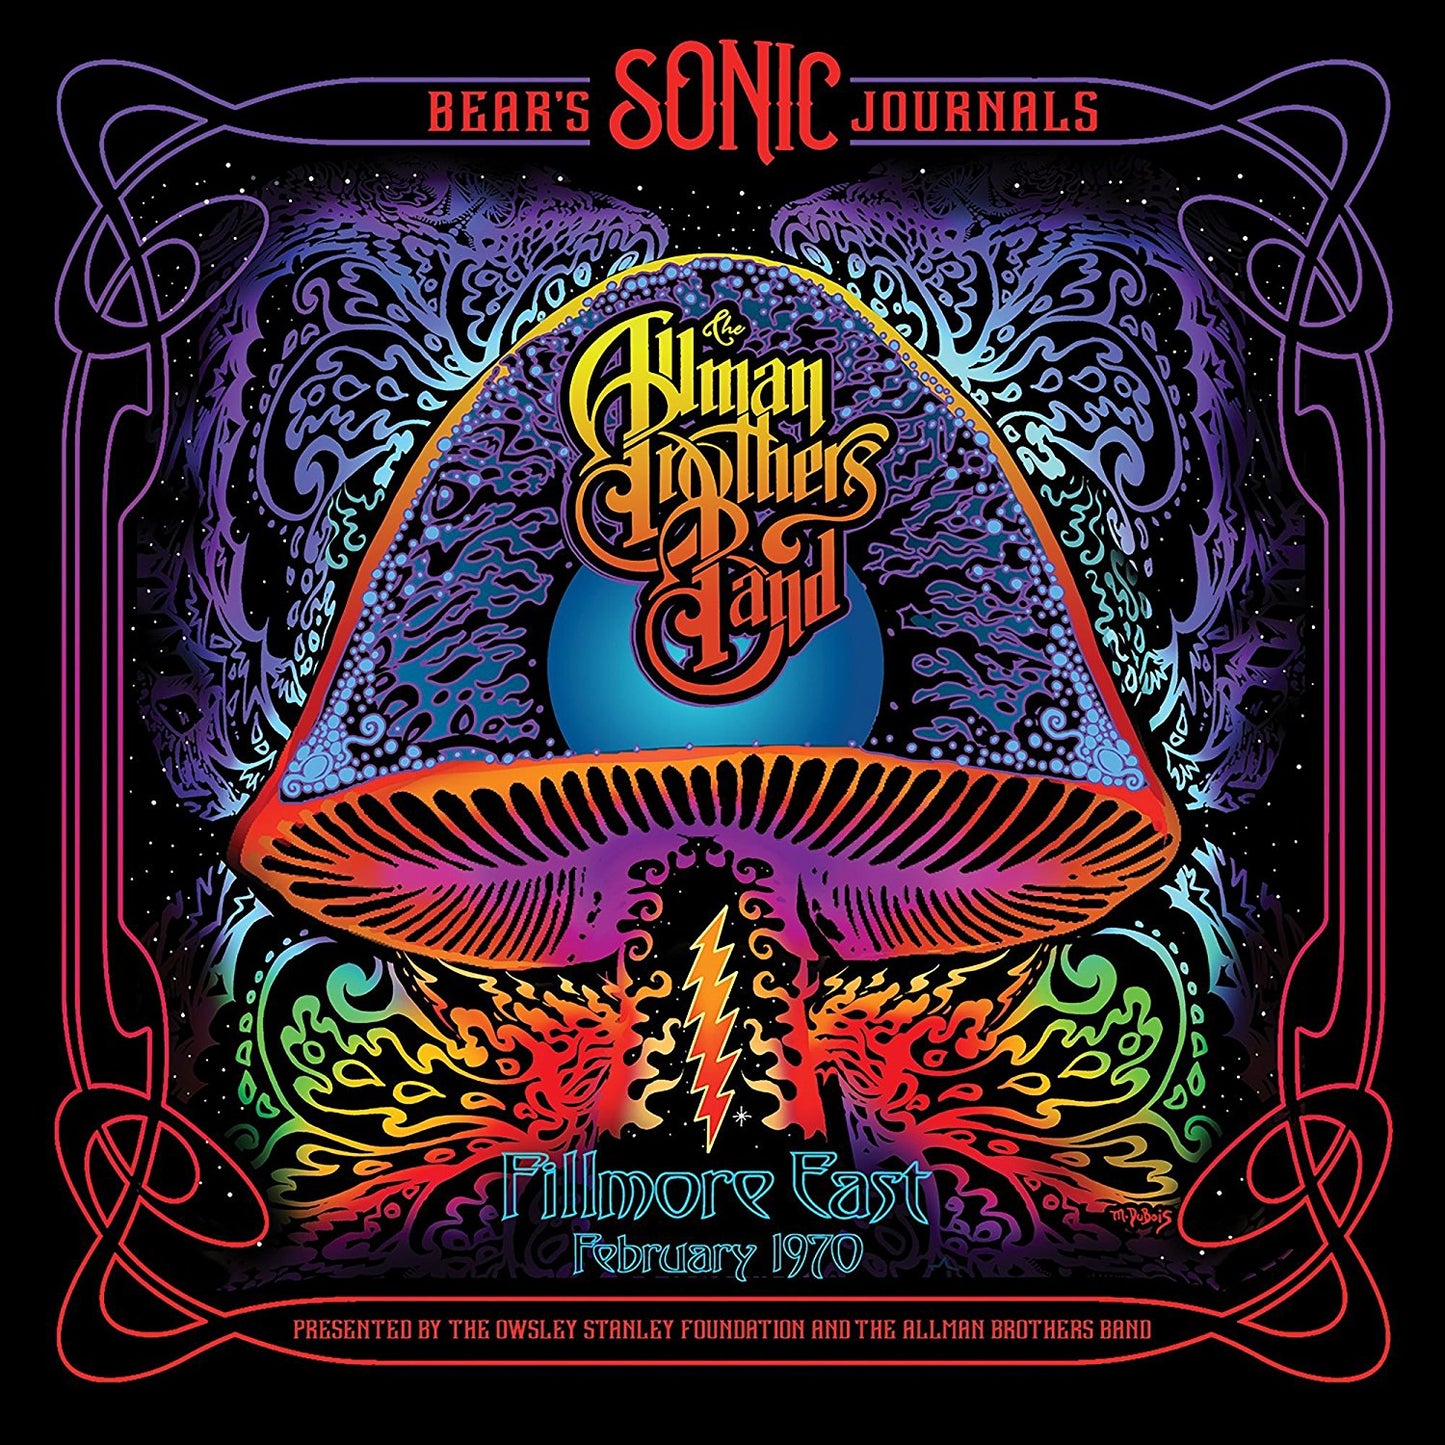 CD - The Allman Brothers Band - Bear's Sonic Journals Fillmore East 1970